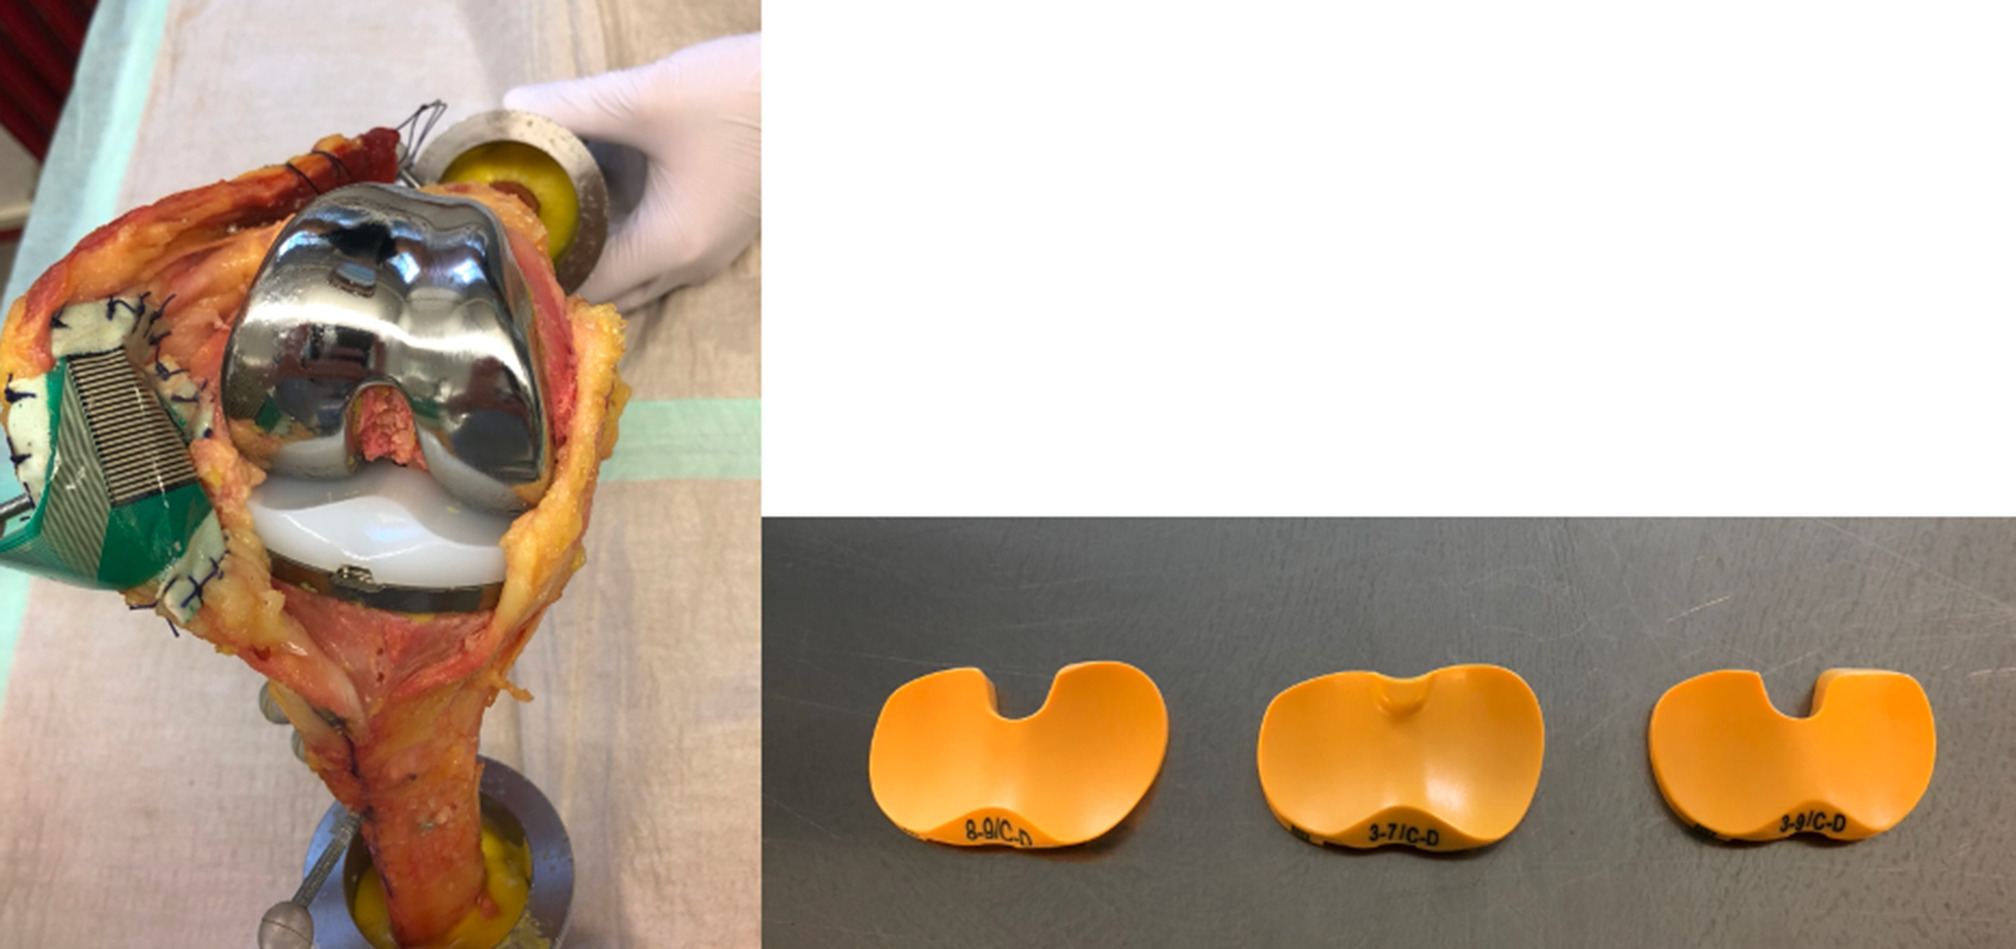 Fig. 2 
            The left photograph shows the standard cruciate-retaining (CR) total knee arthroplasty implanted after mechanical alignment. The inserts used are shown in the photograph on the right: the medial congruent insert on the left with a deepened medial plateau and a flattened lateral plateau, the ultra-congruent insert in the centre with medial and lateral conformity, and the standard CR insert on the right.
          